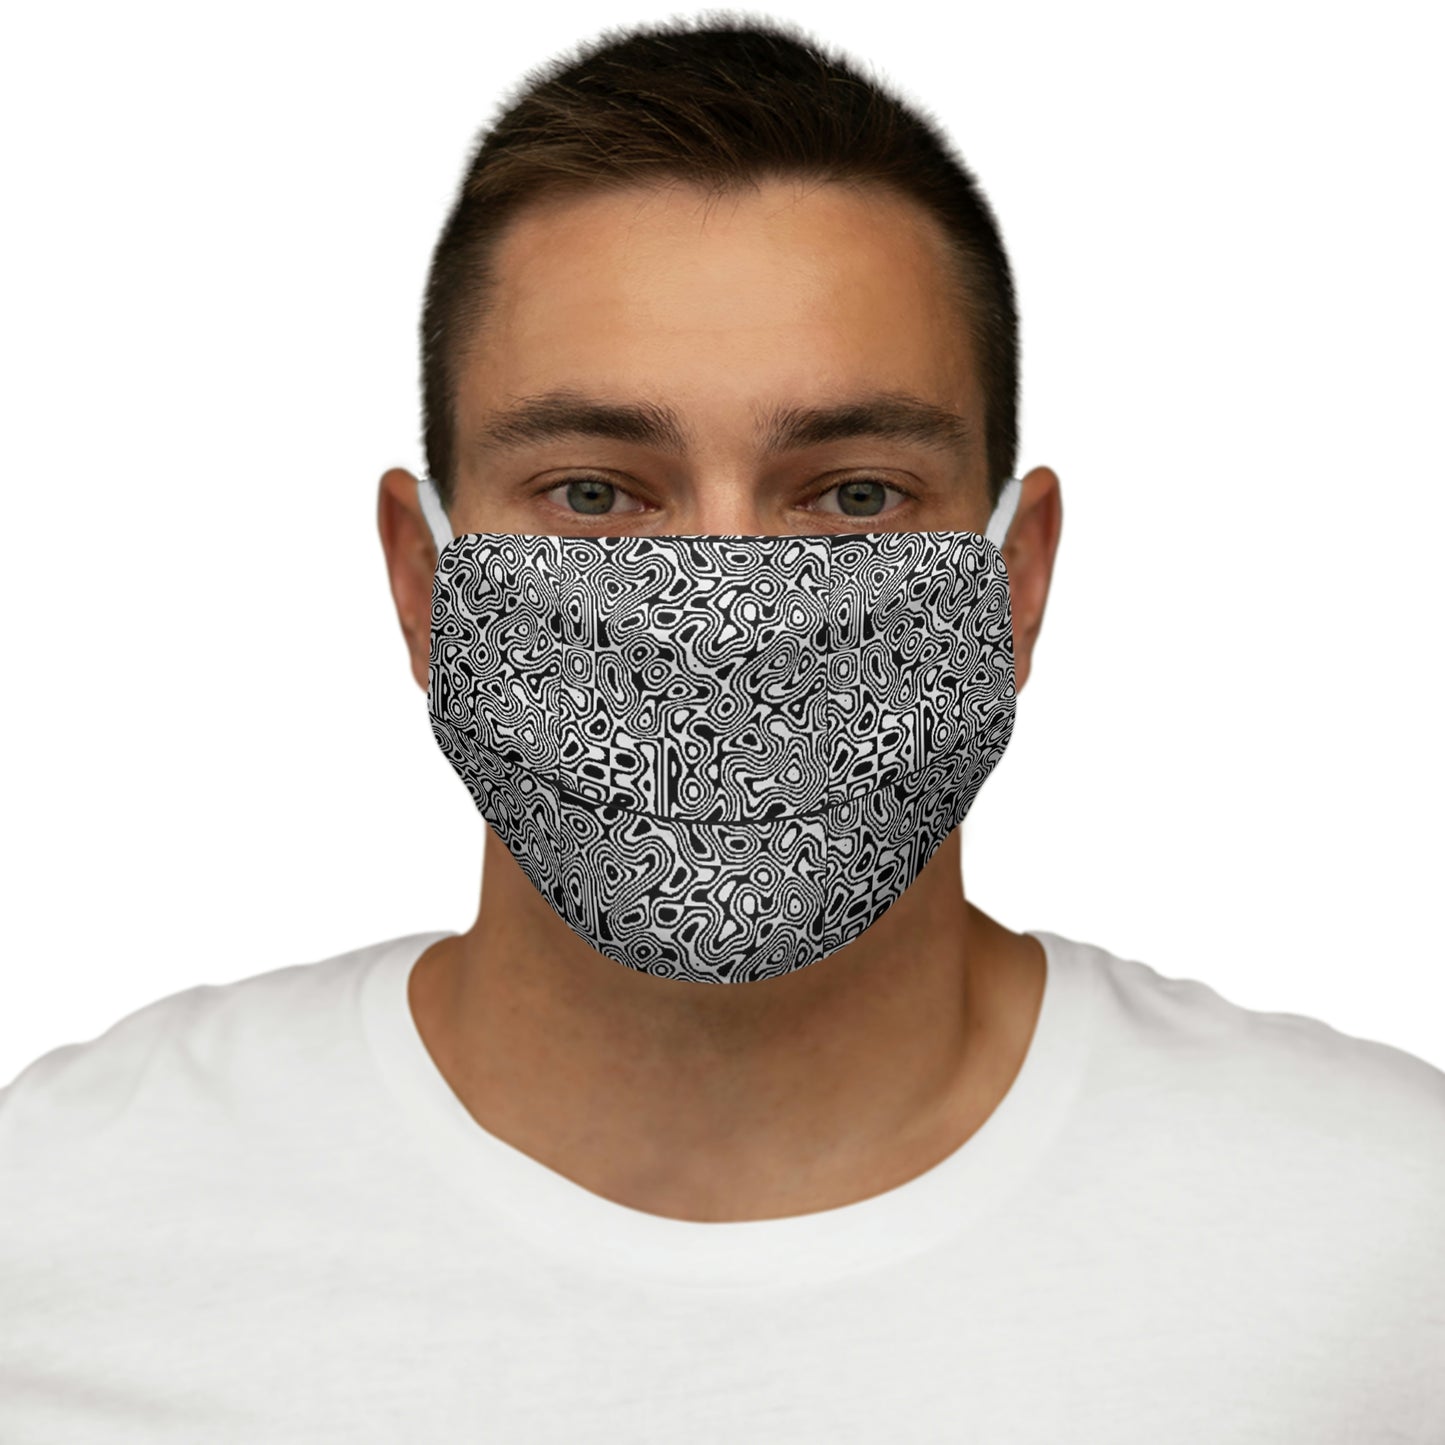 Anti Facial Recognition / Adversarial Pattern Snug-Fit Face Mask